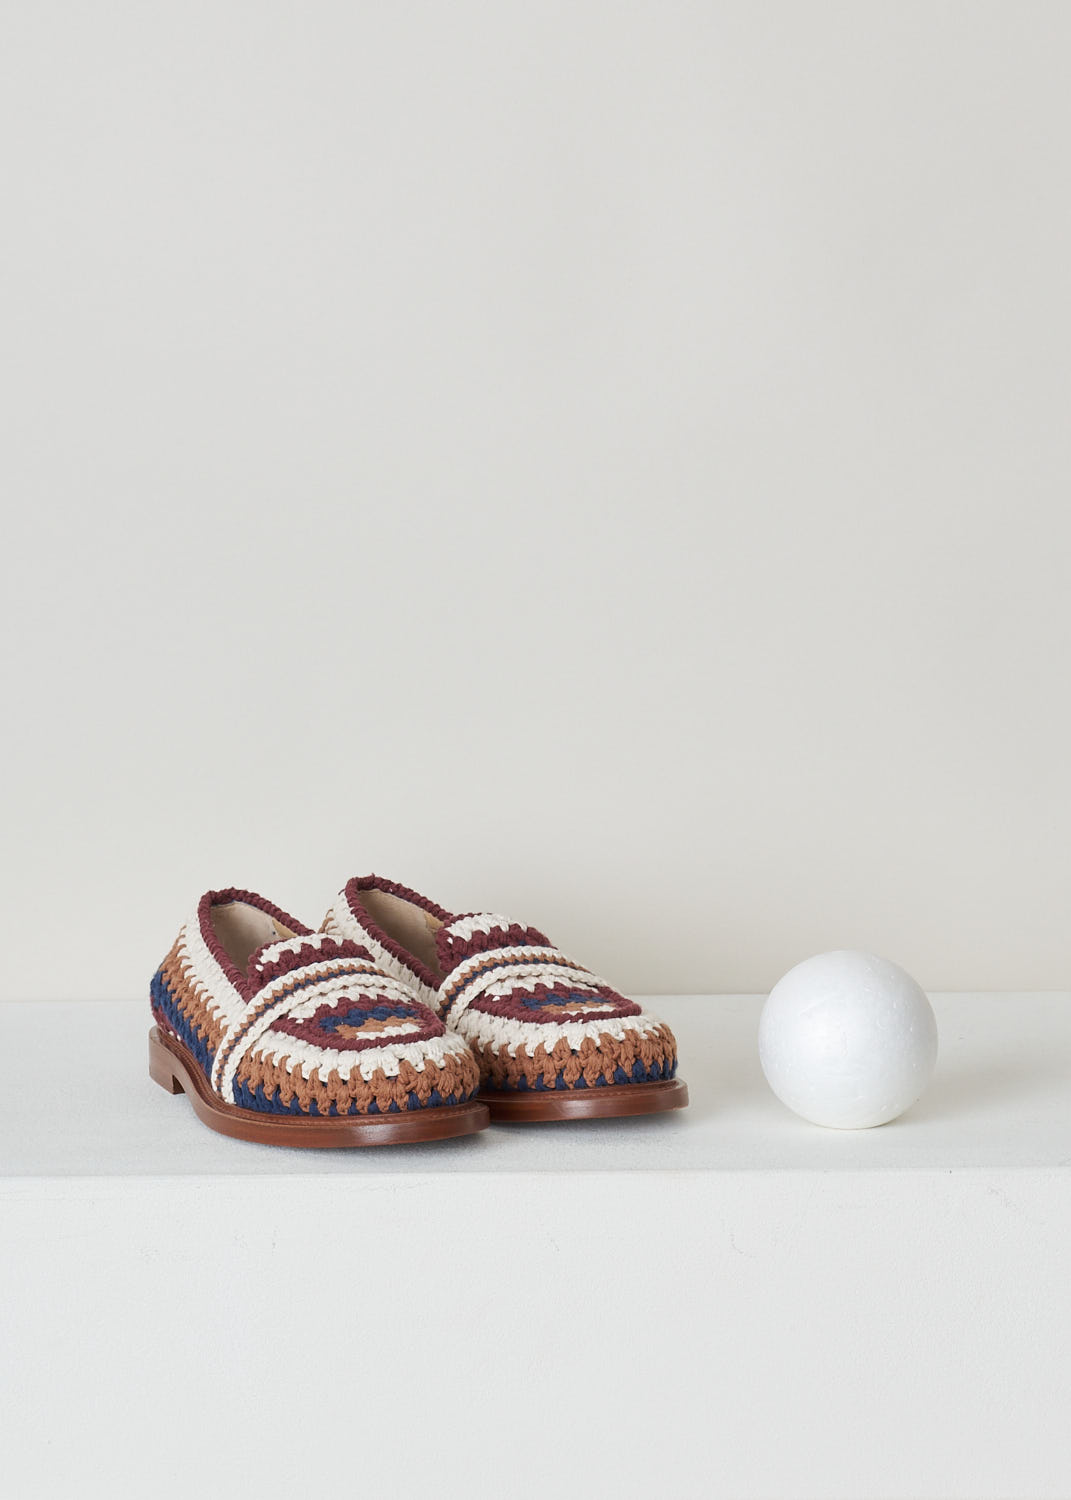 CHLOÃ‰, CROCHET MULTICOLOR LOAFERS, CHC22S584X04ZA_KALYA_FLAT_LOA_4ZA_MULTICOLOR_BLUE, Print, Front, These multicolored crochet loafers have a slip-on style with a round toe. The shoes have a sleek brown sole.
